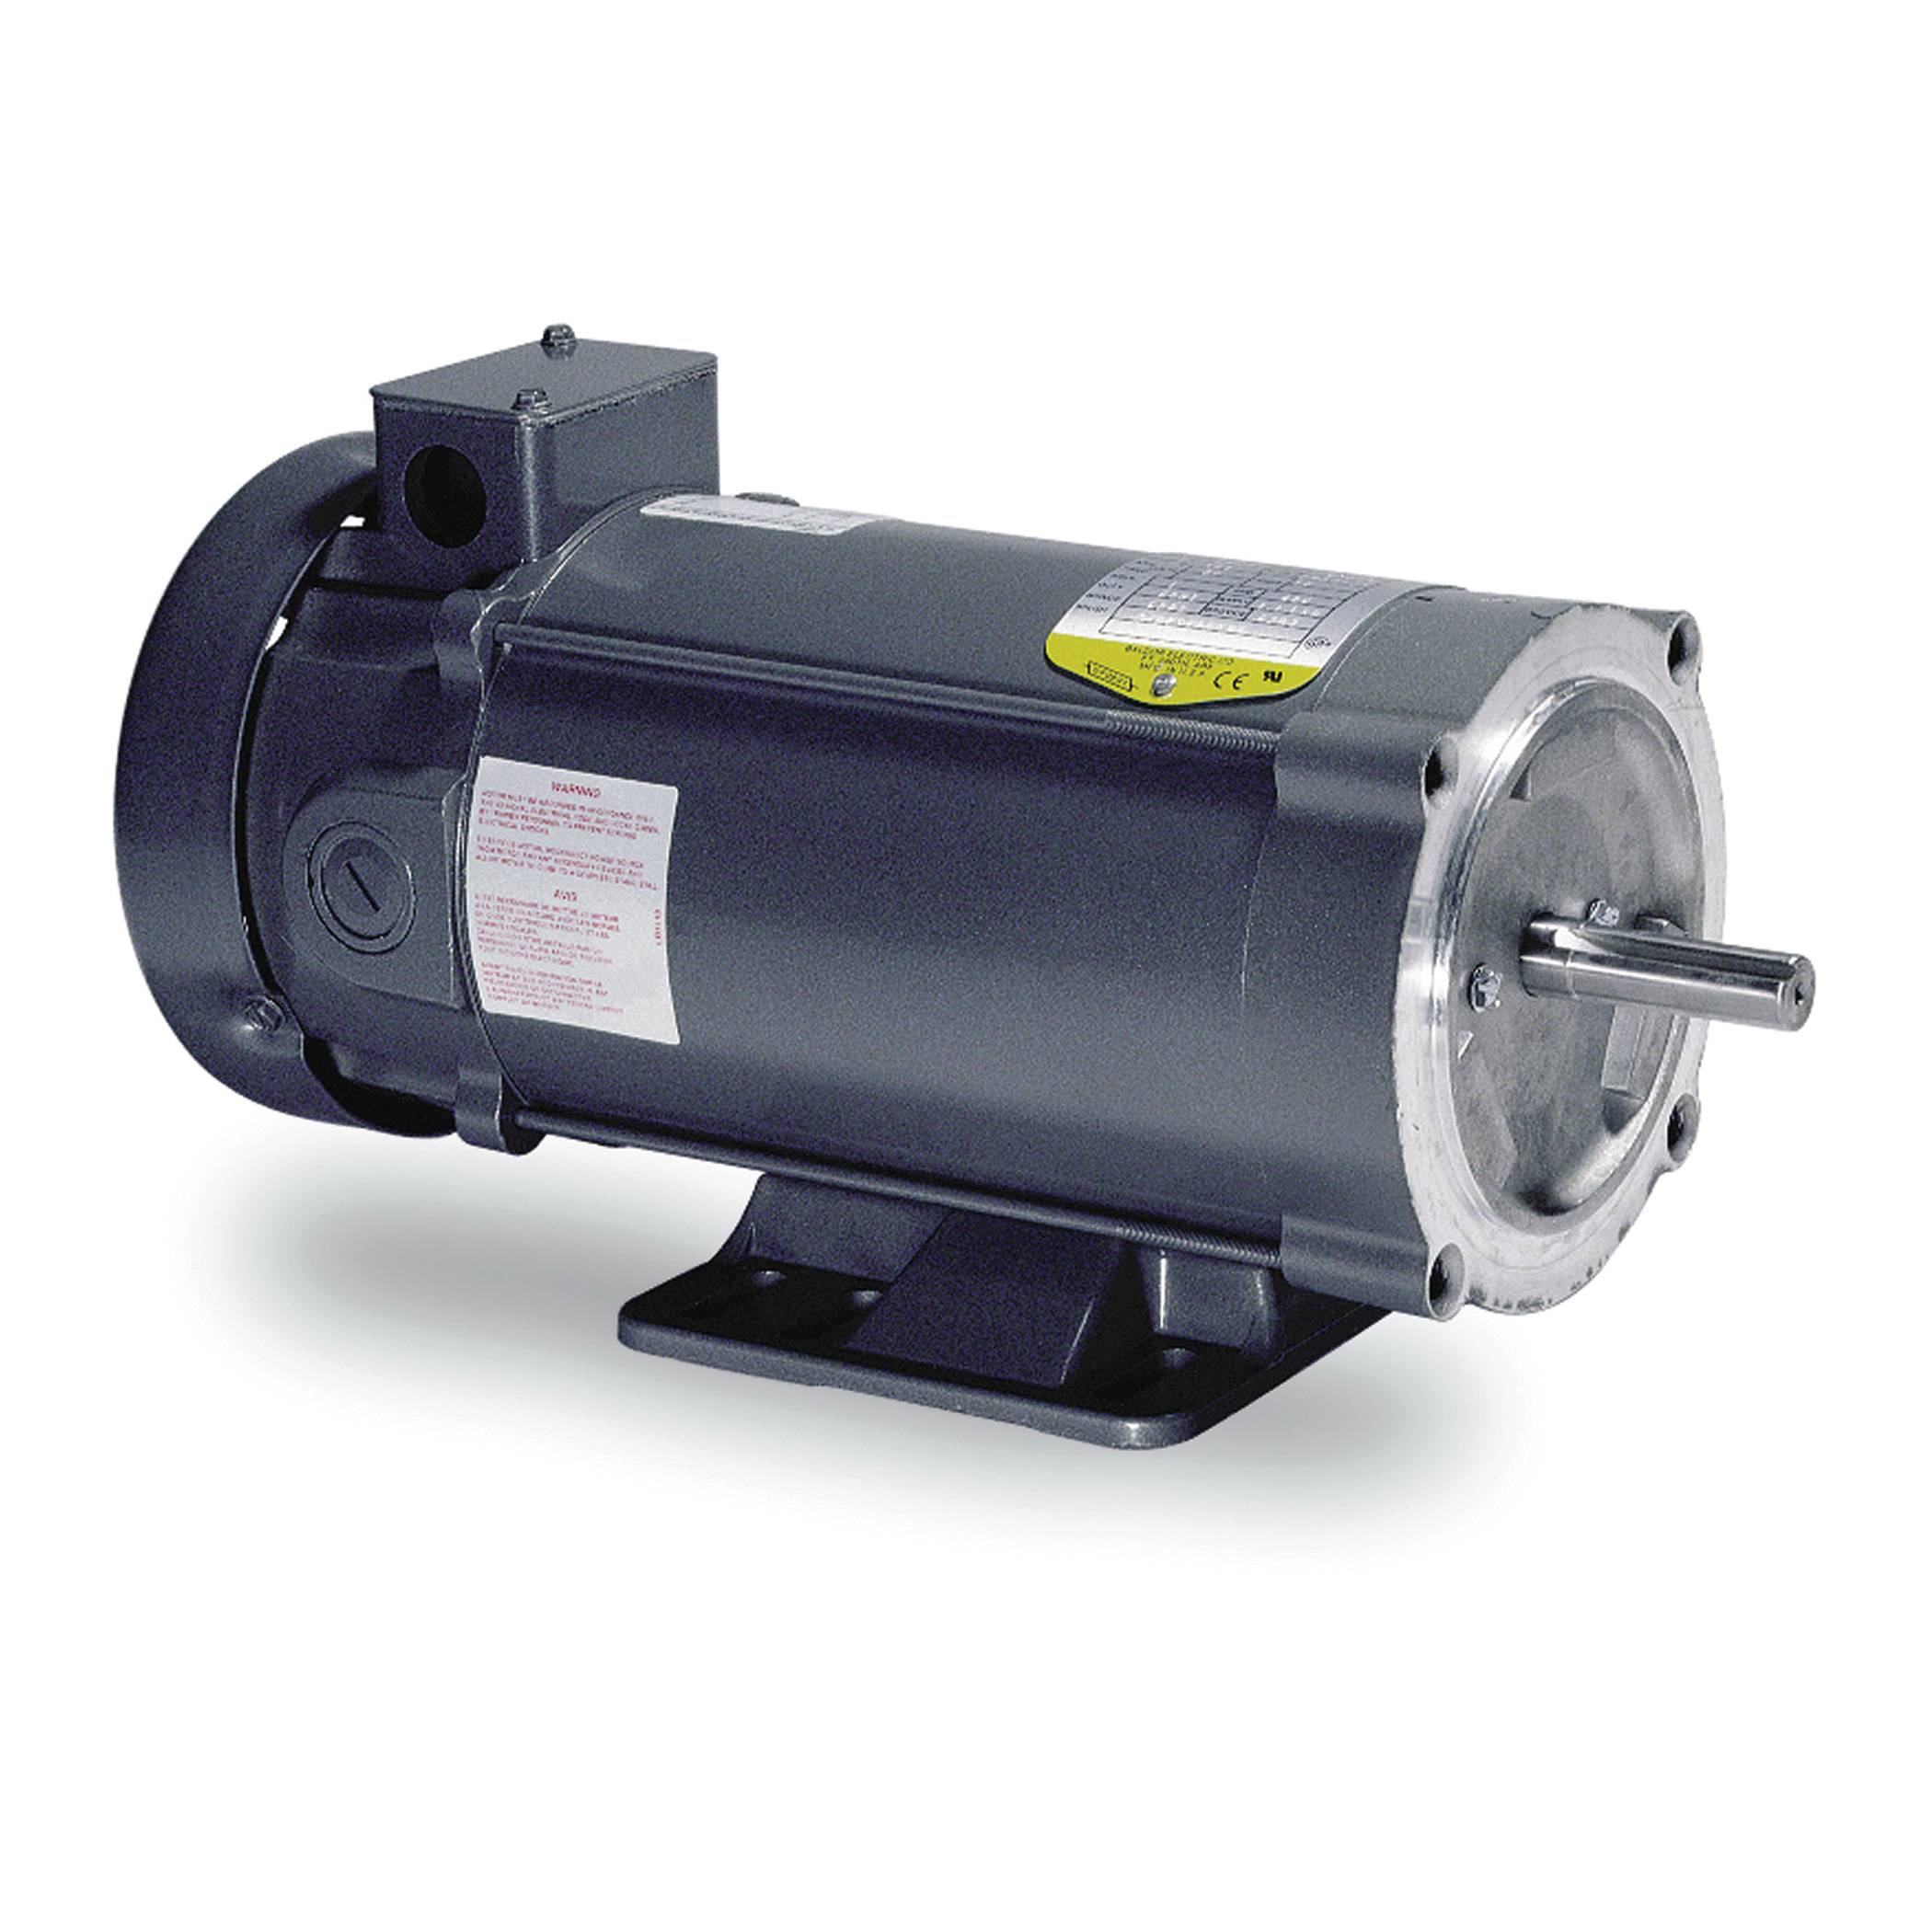 Baldor-Reliance CDP3310 C-Face Continuous Duty Fractional DC Motor With Base, 0.25 hp Power Rating, 90 VDC, 2.5 A, 56C Frame, 1750 rpm Speed